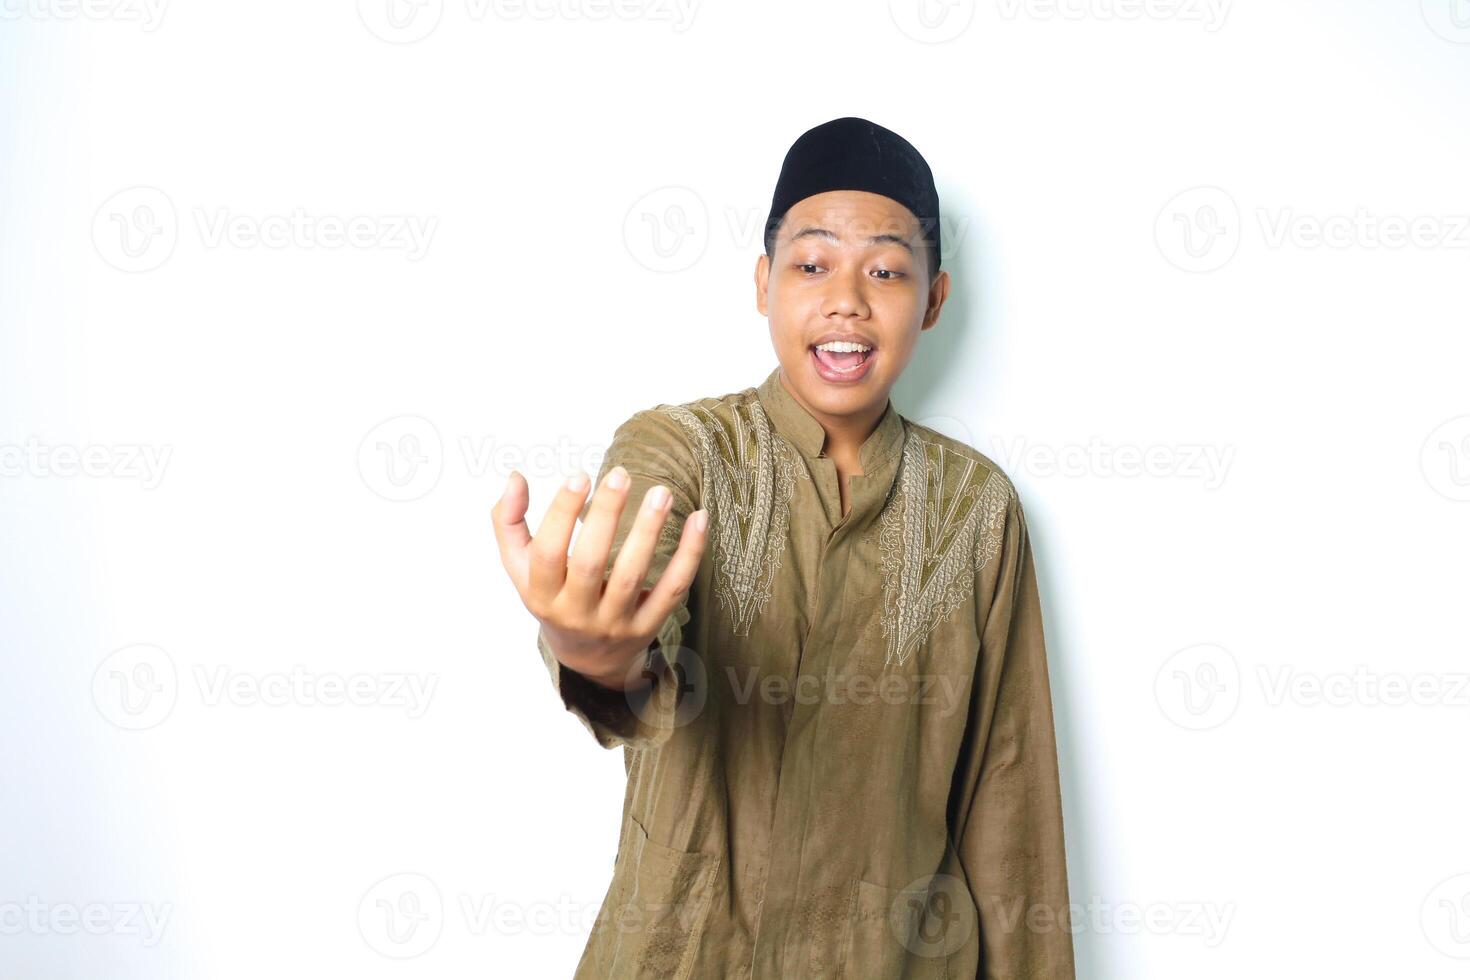 surprised asian muslim man presenting with palm like holding bowl isolated in white background photo